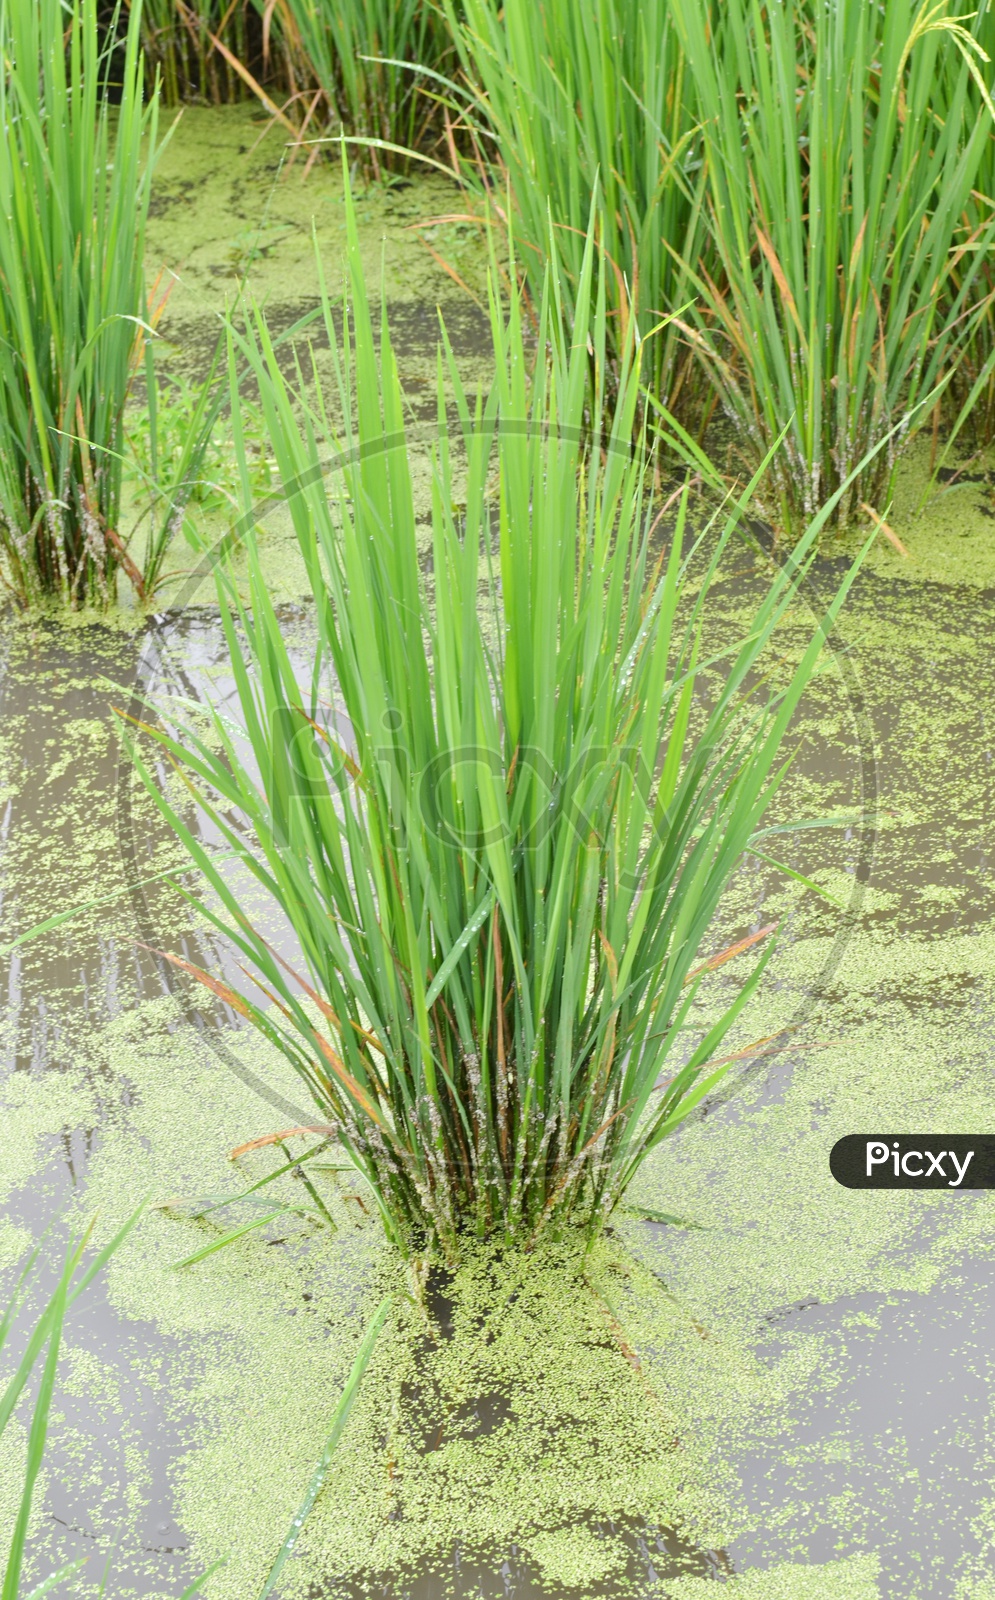 Rice Ears or Rice Spikelet  in Paddy Fields